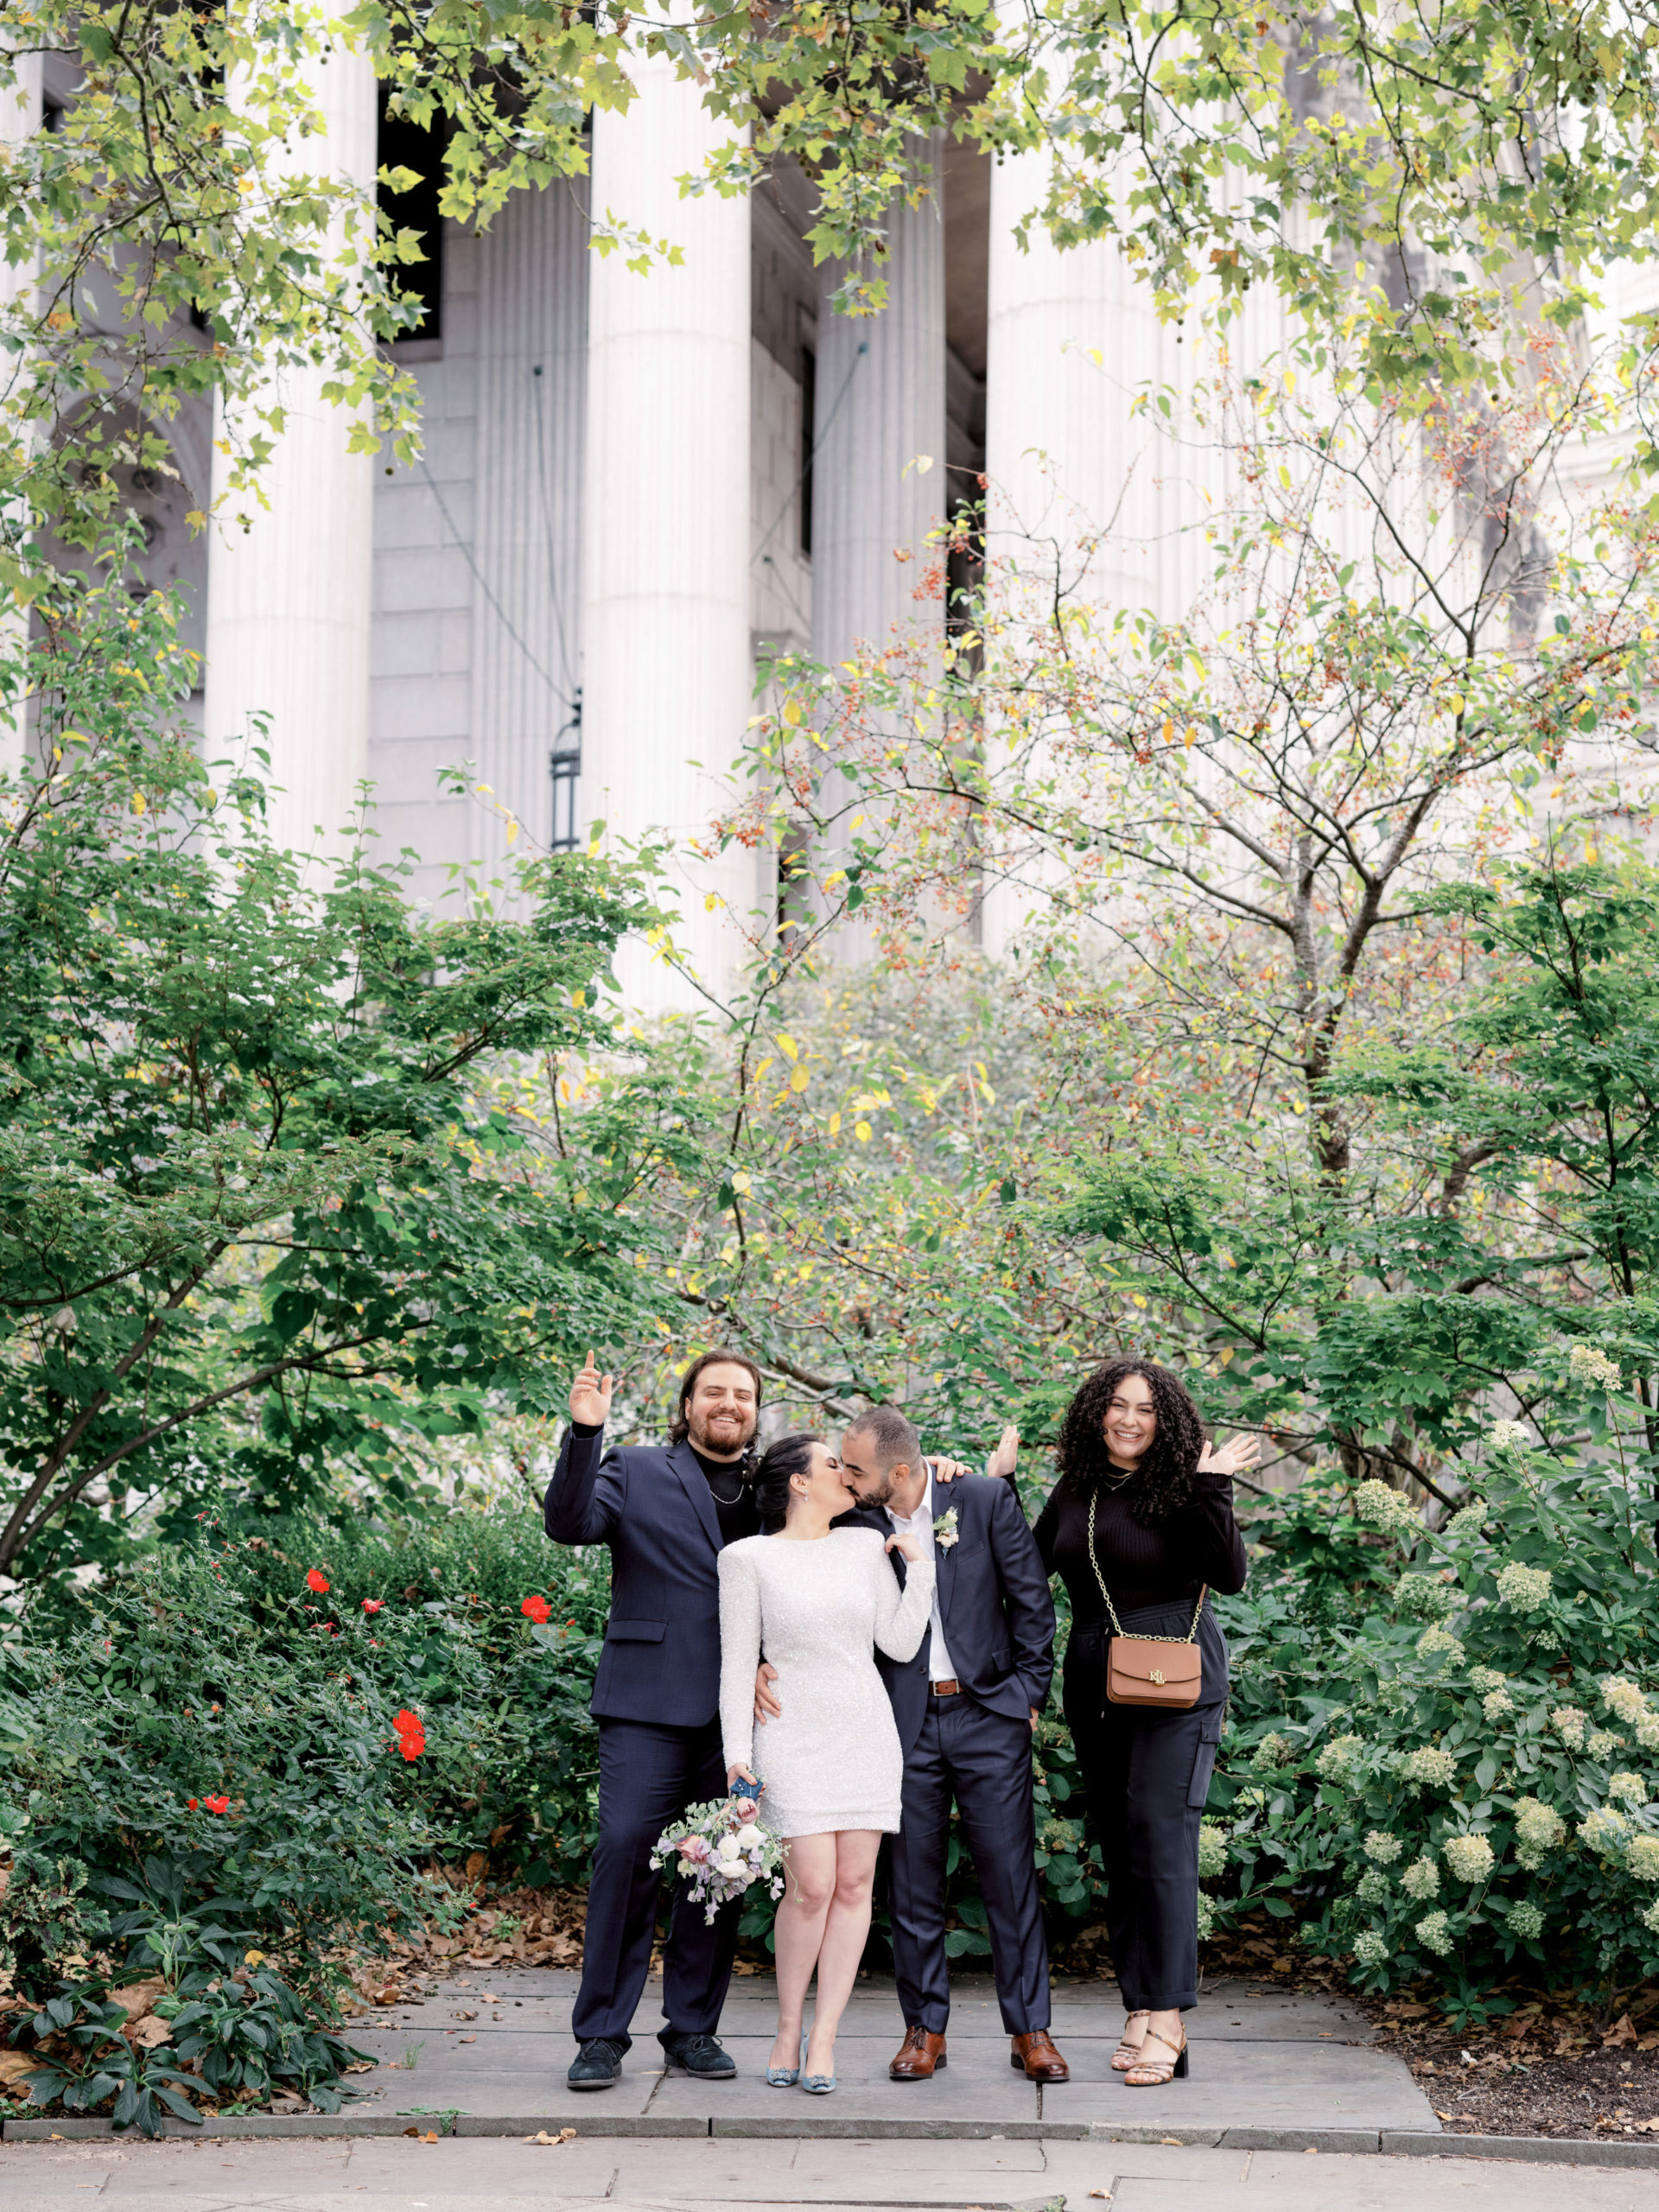 The bride and groom are kissing, their friends, smiling, with trees in the background. Image by Jenny Fu Studio NYC